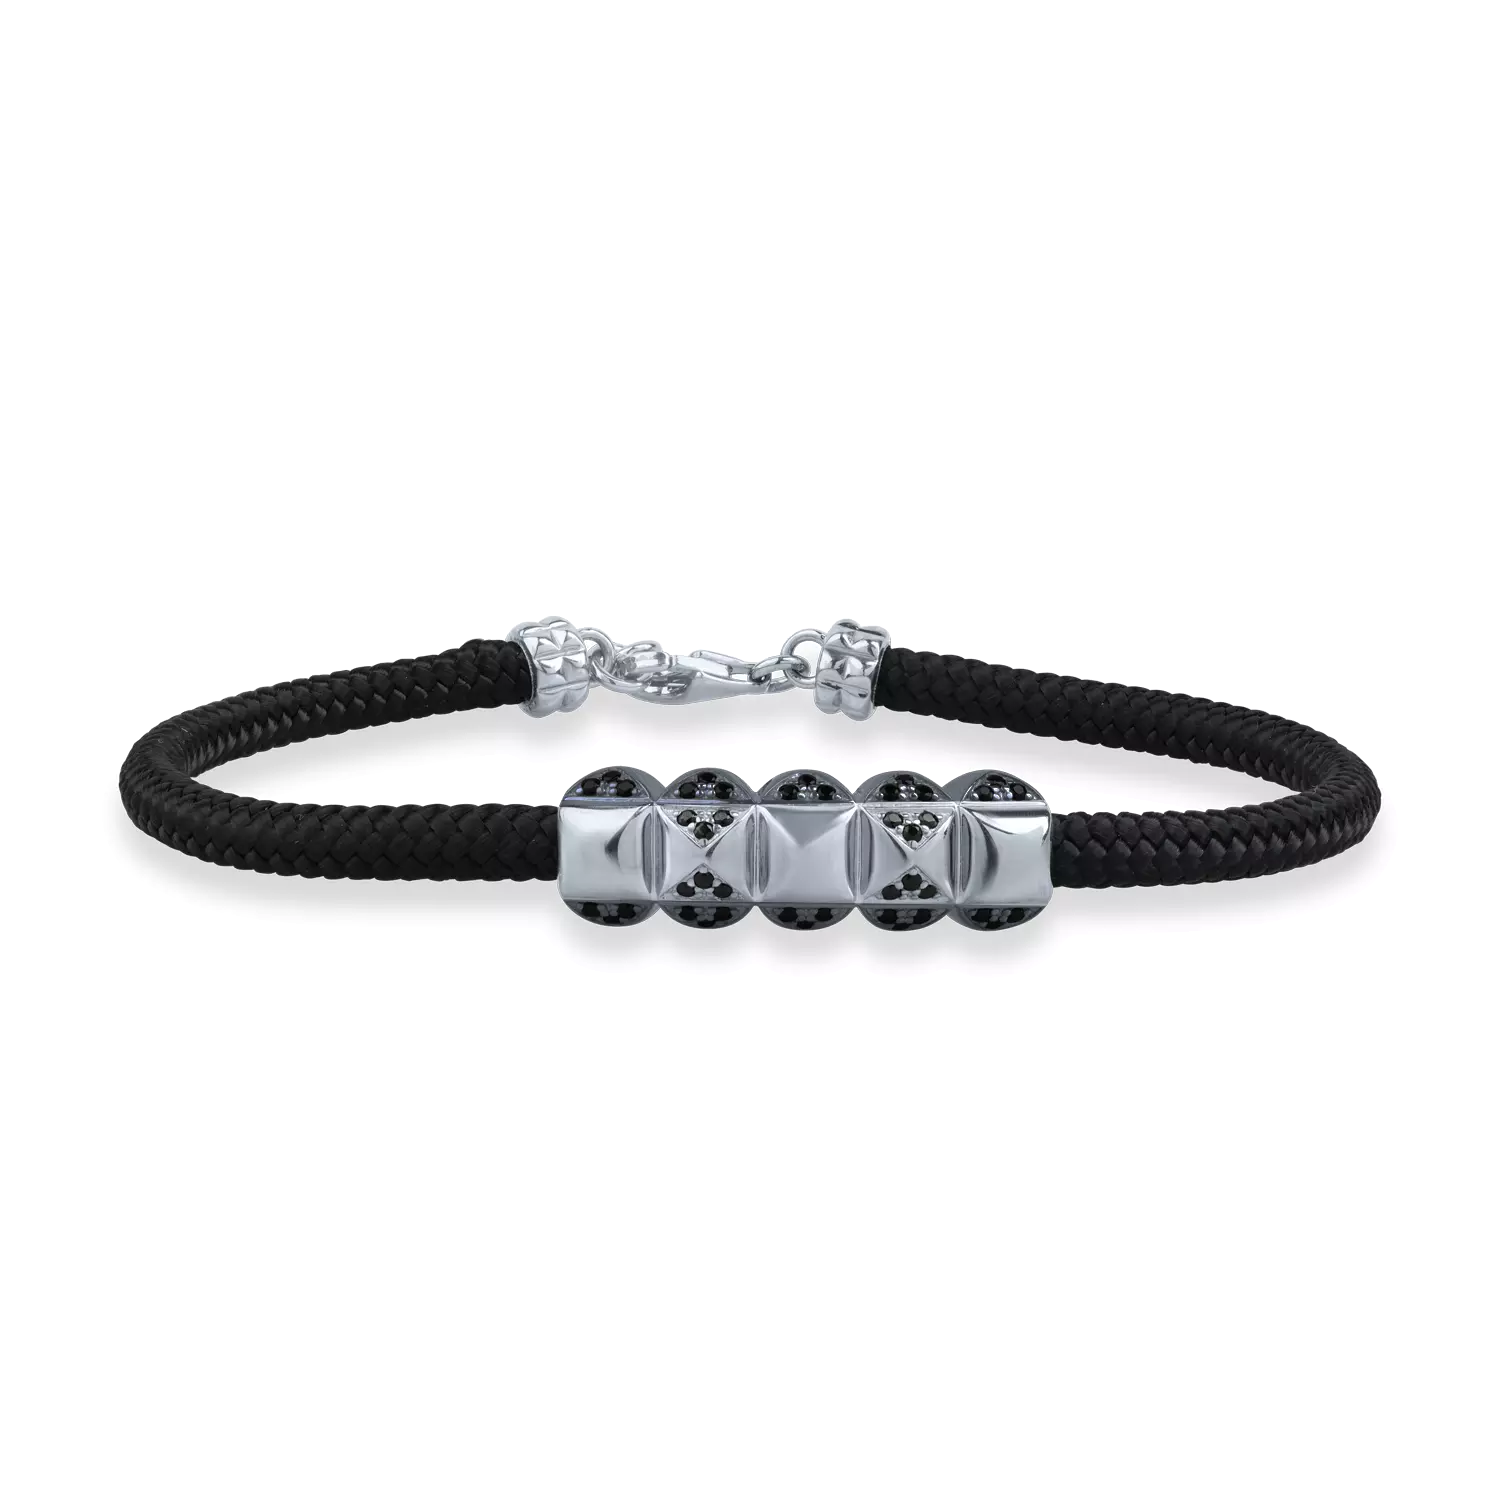 Bracelet with black cord and silver details for men